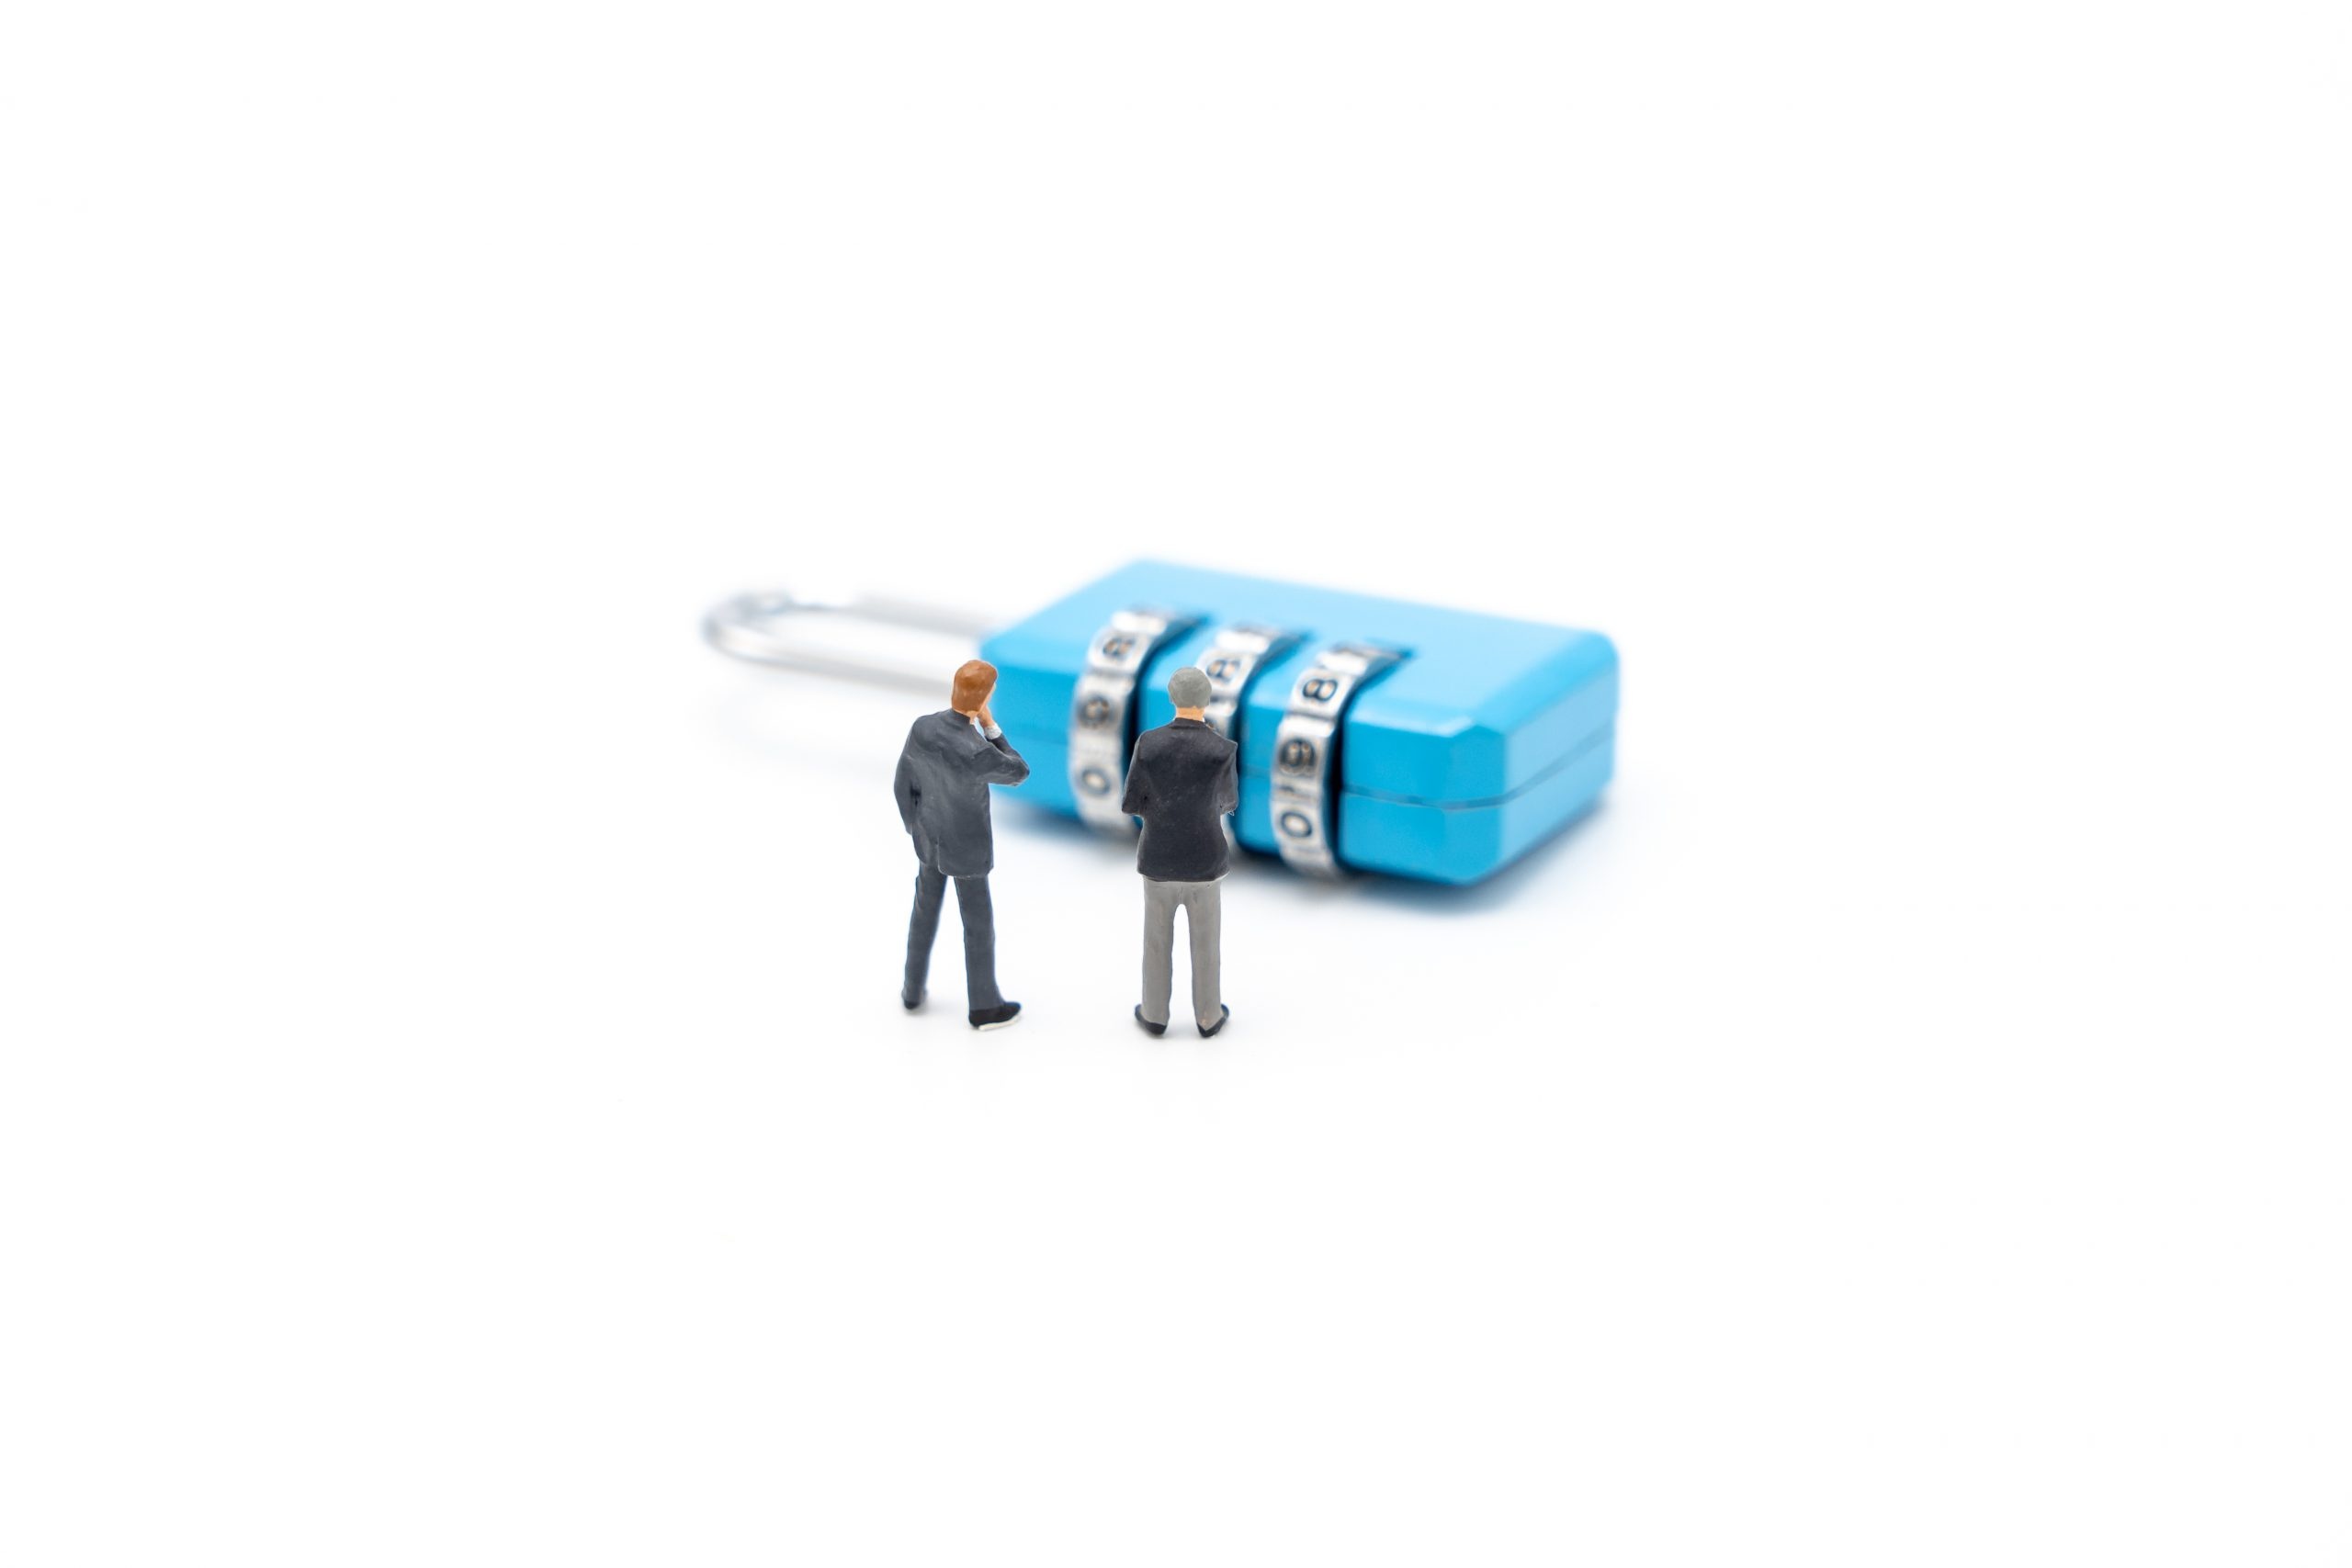 Miniature people businessmen analyze password From the blue key as background business concept and Security concept with copy space.